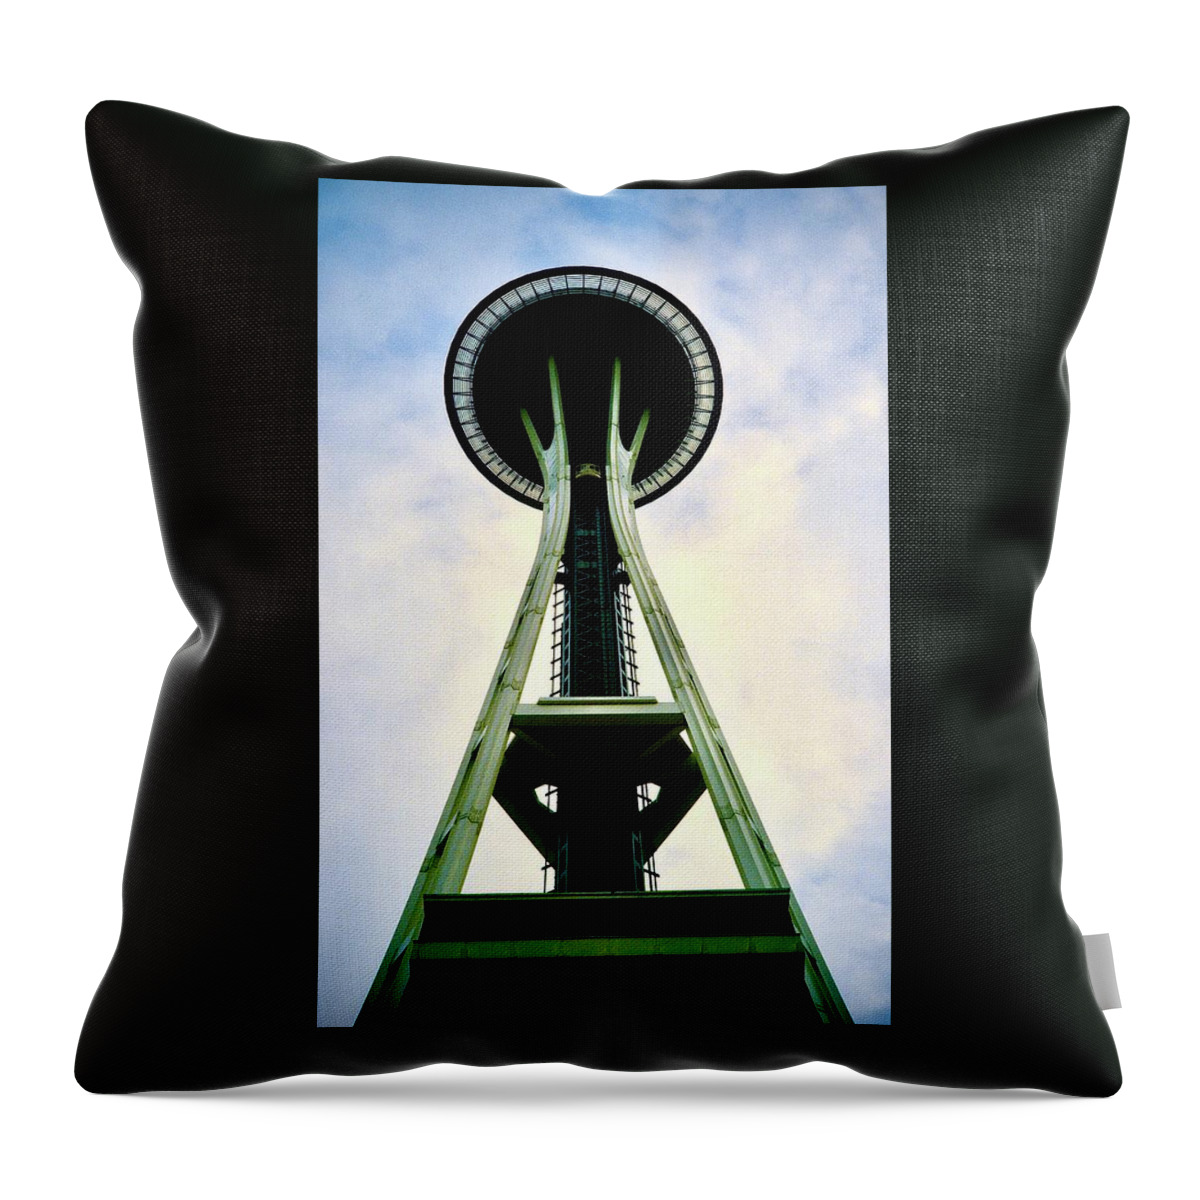  Throw Pillow featuring the photograph Seattle Space Needle by Gordon James